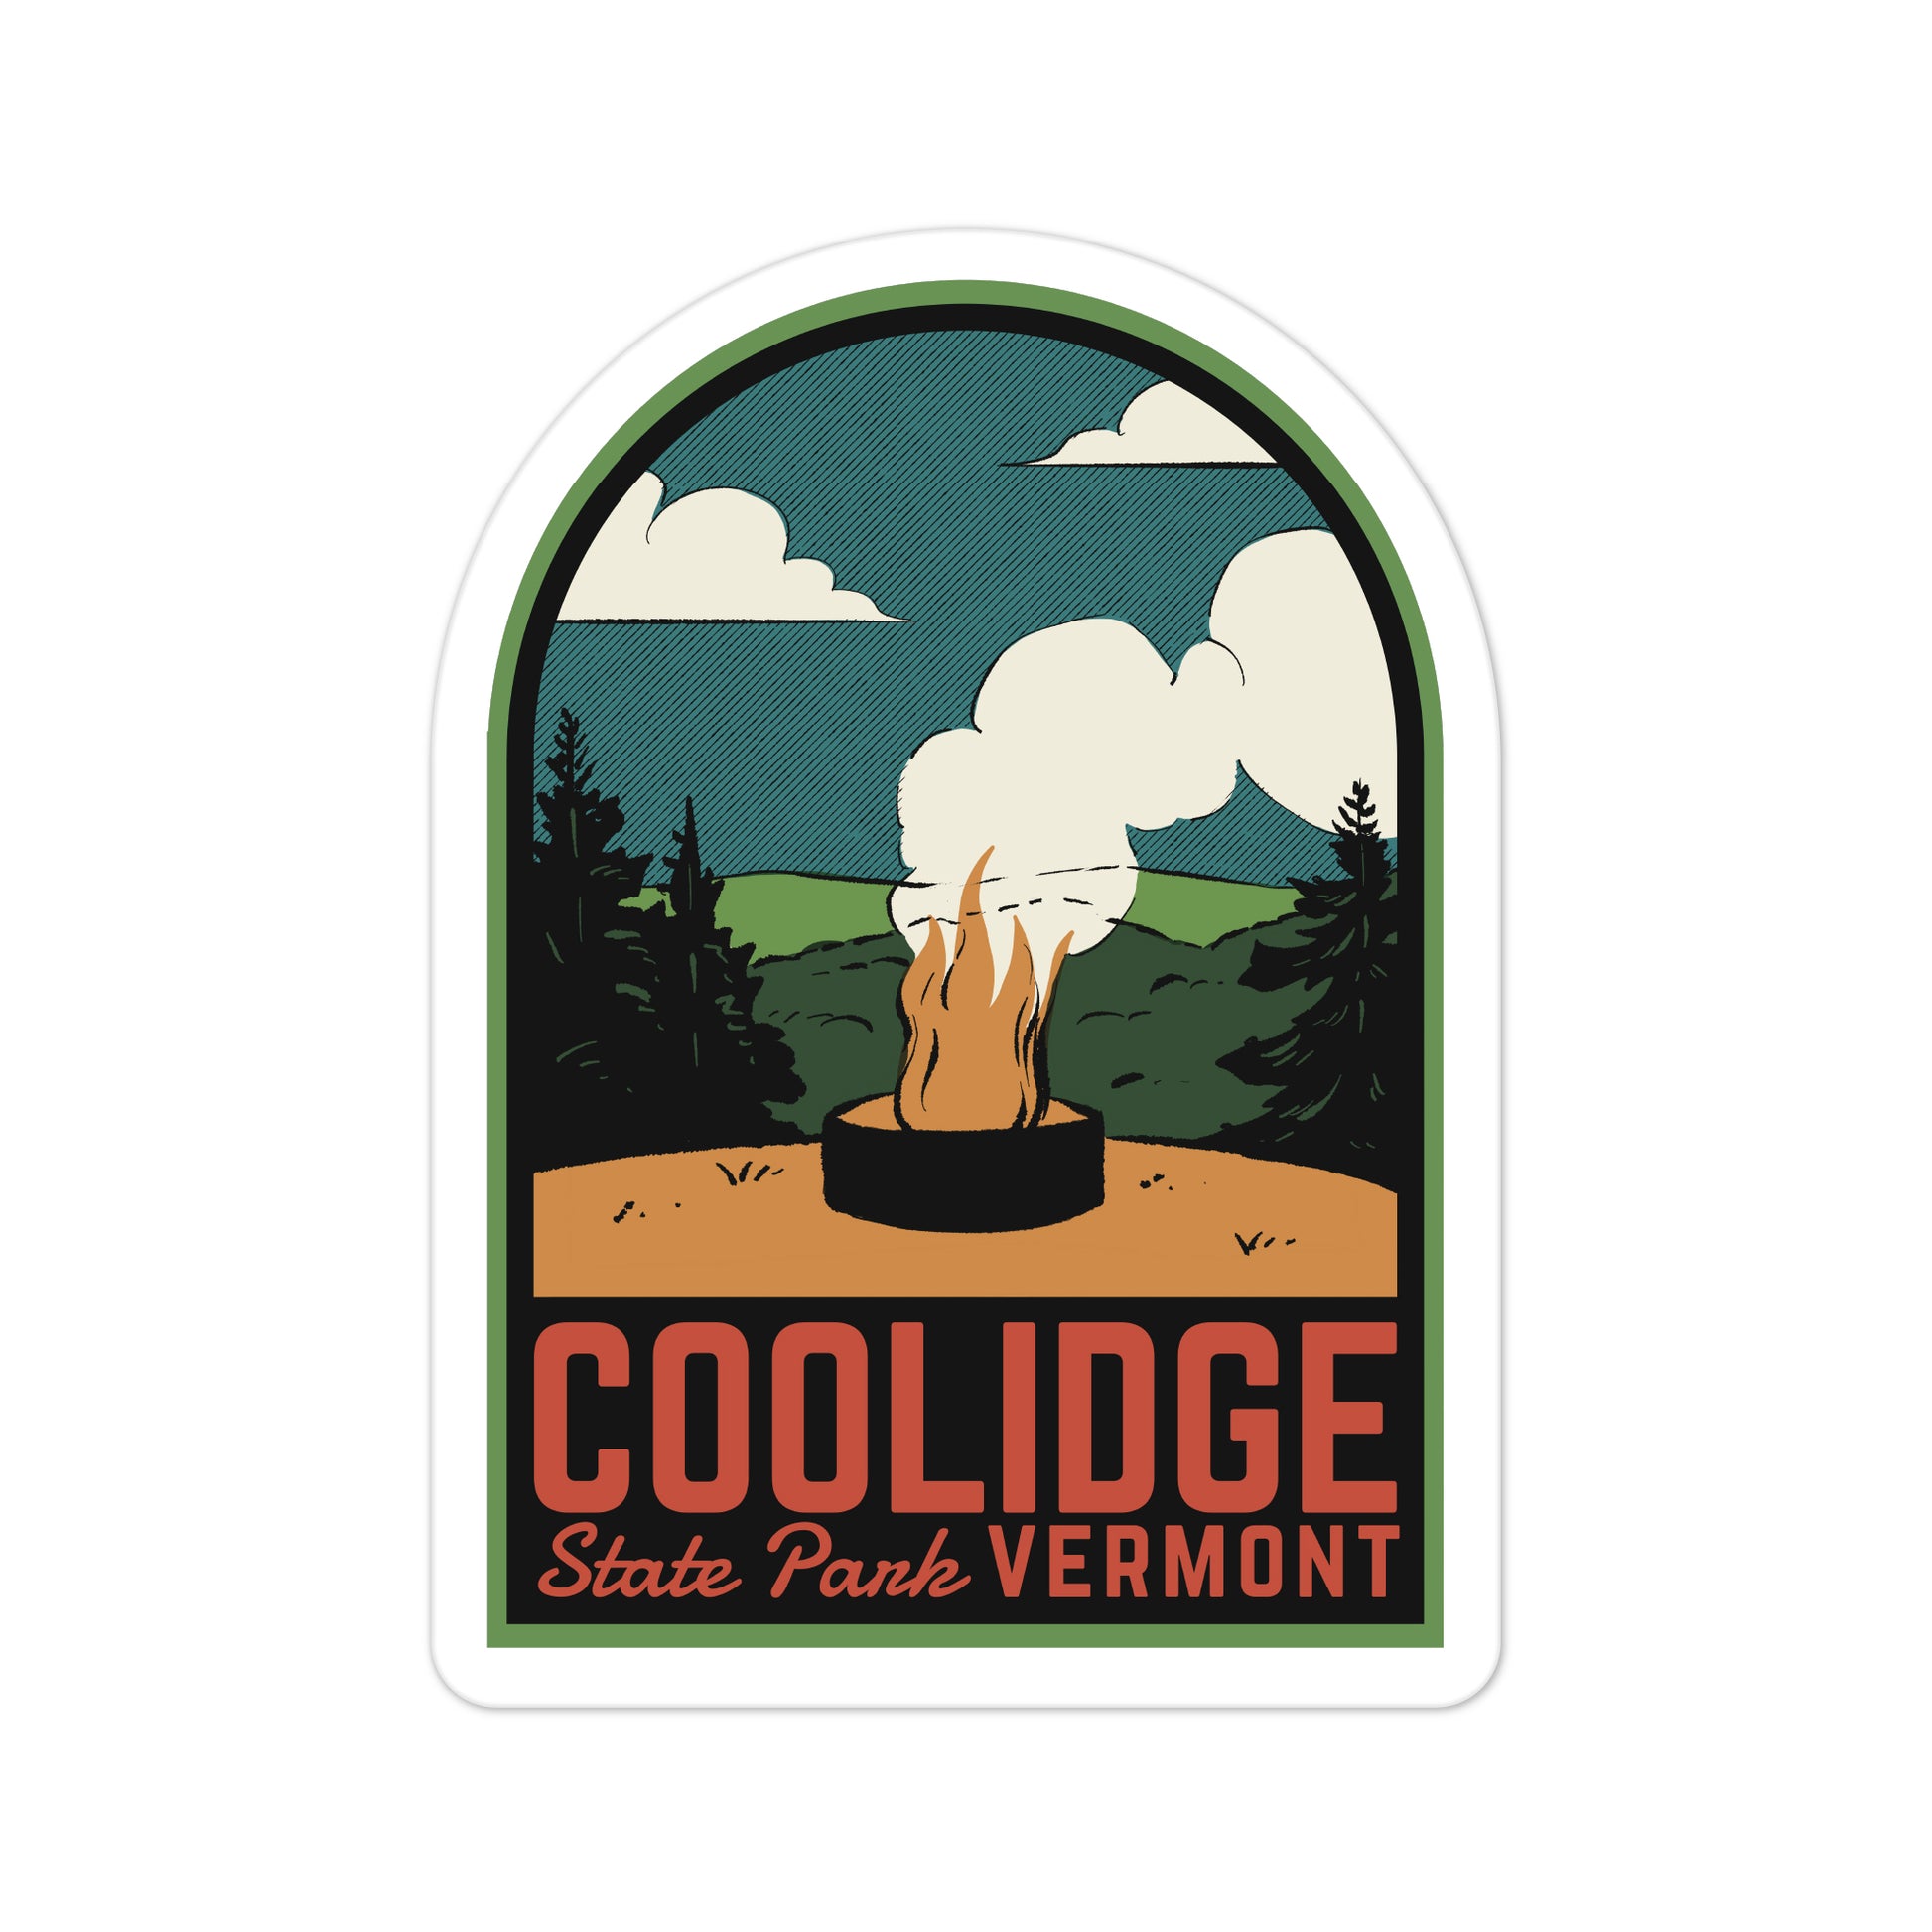 A sticker of Coolidge State Park